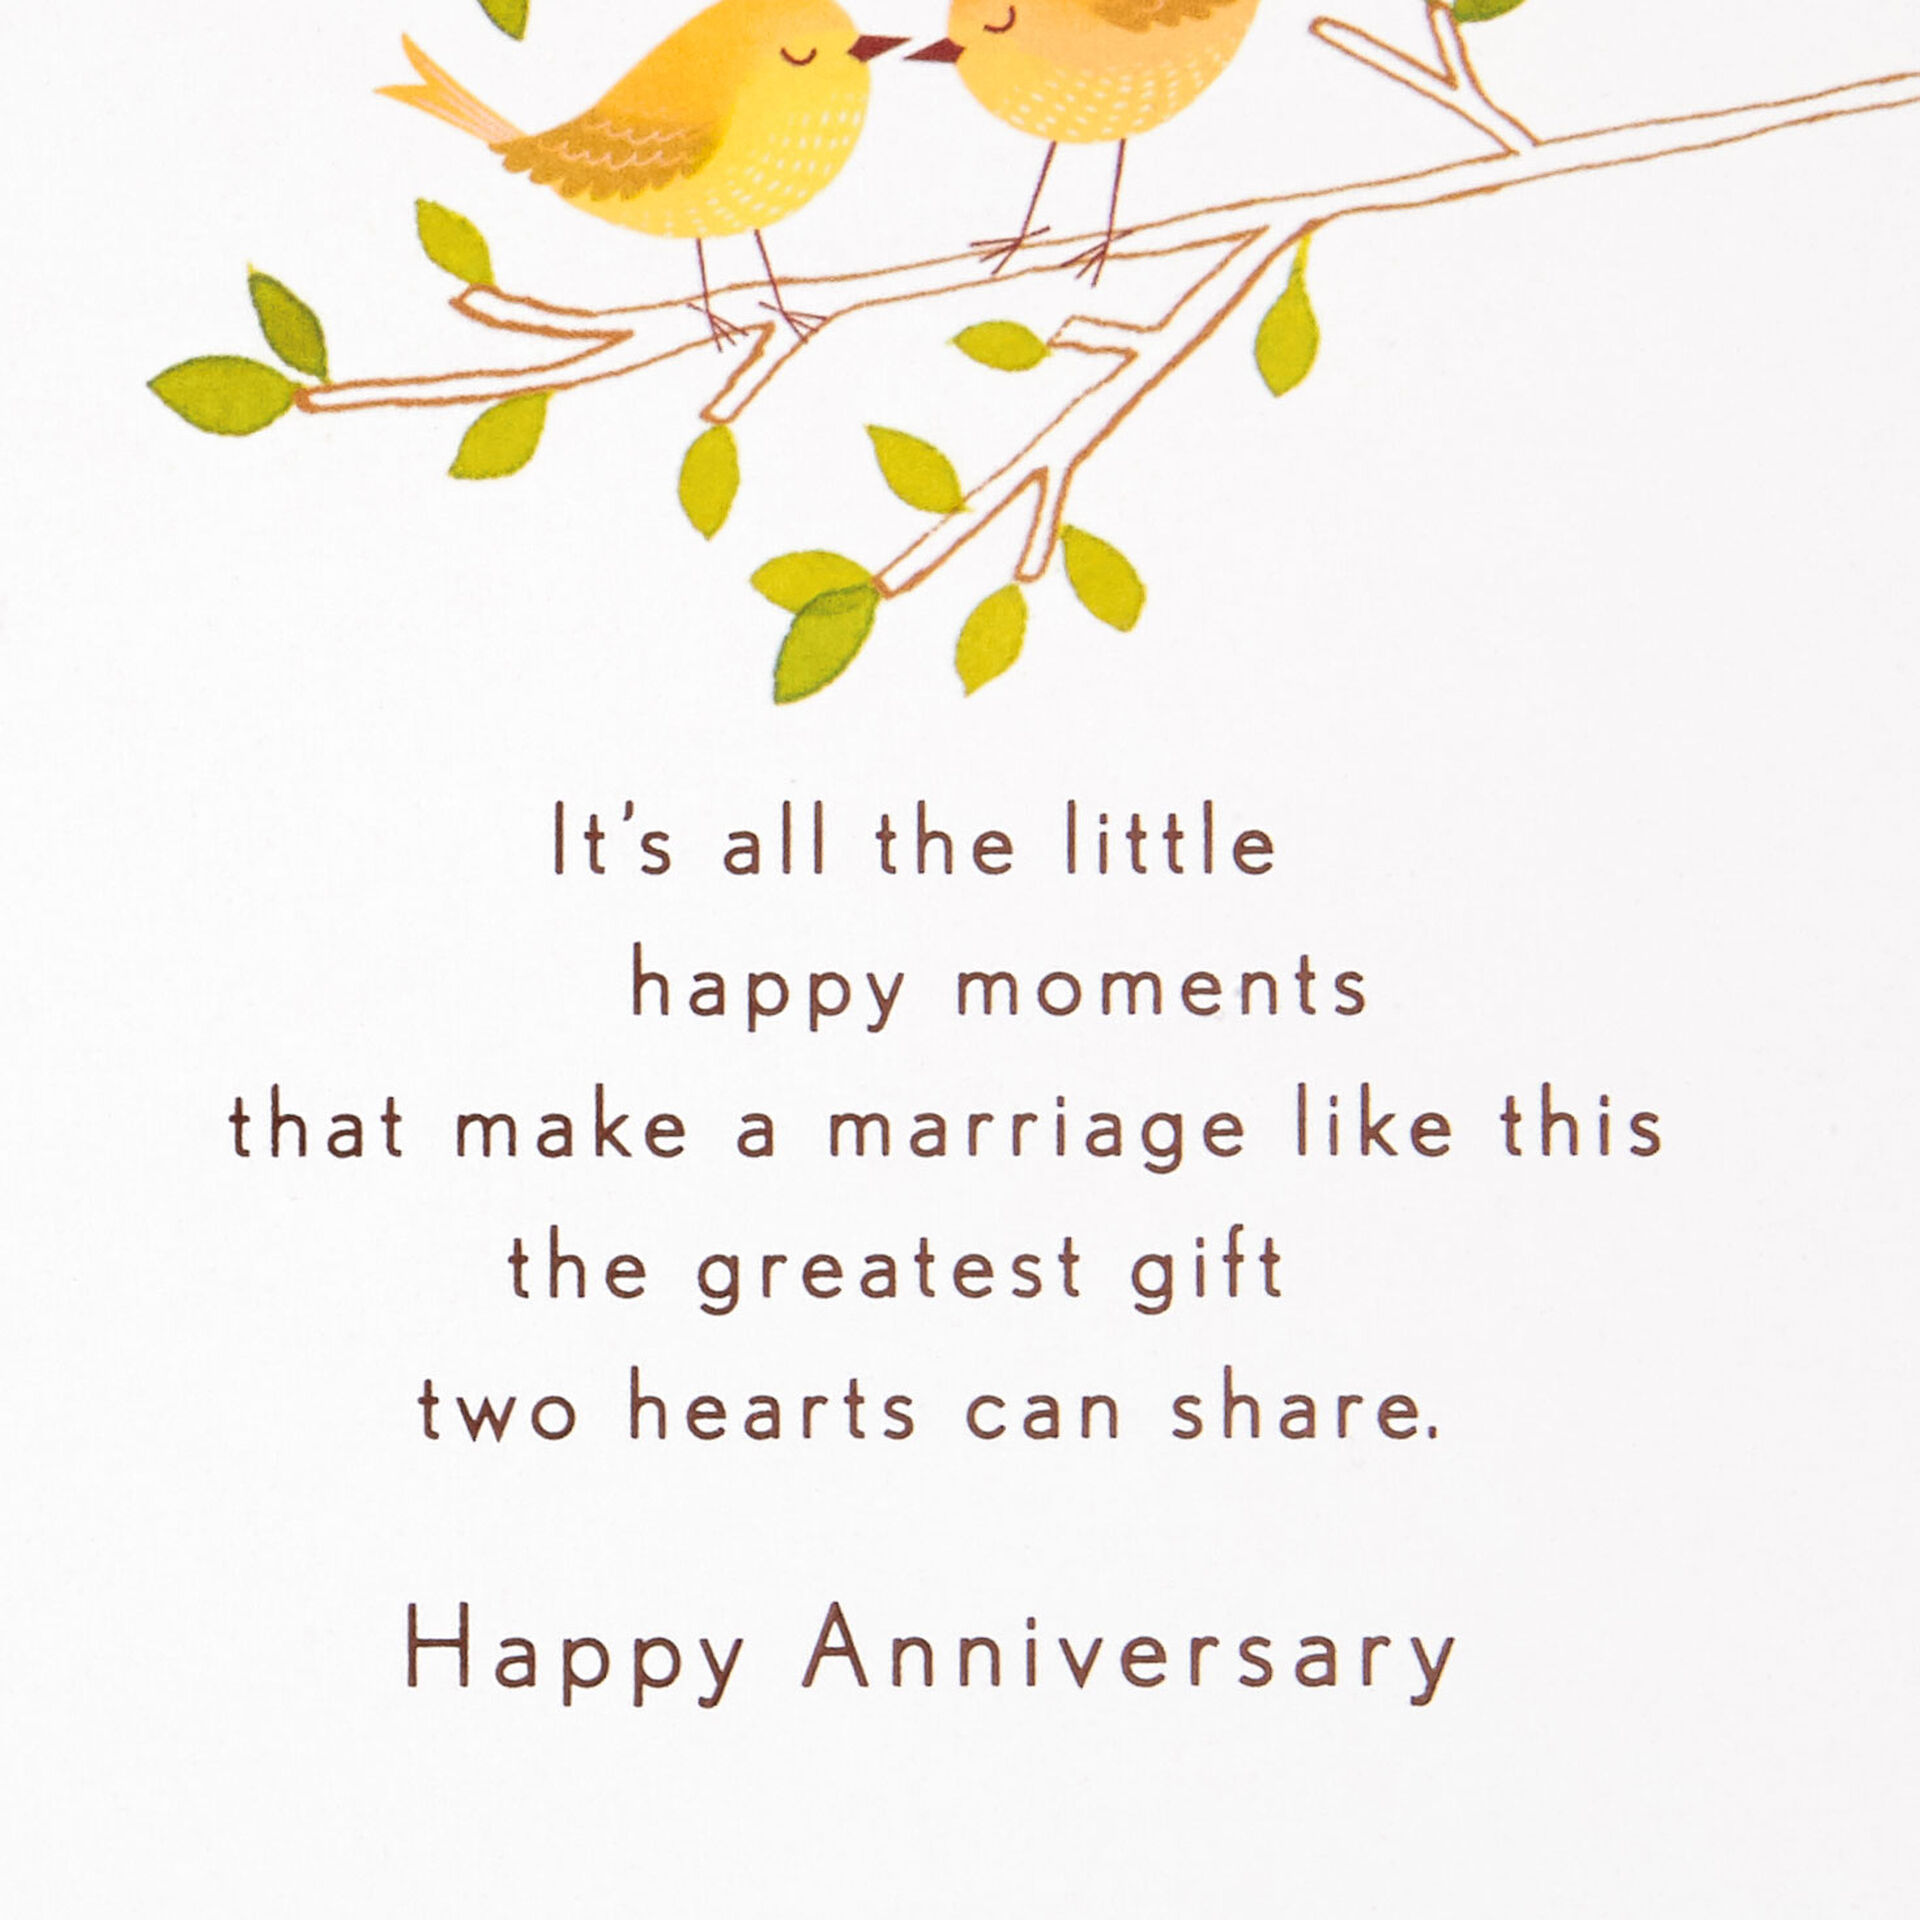 Love-the-Little-Things-Anniversary-Card_399AVY2662_02